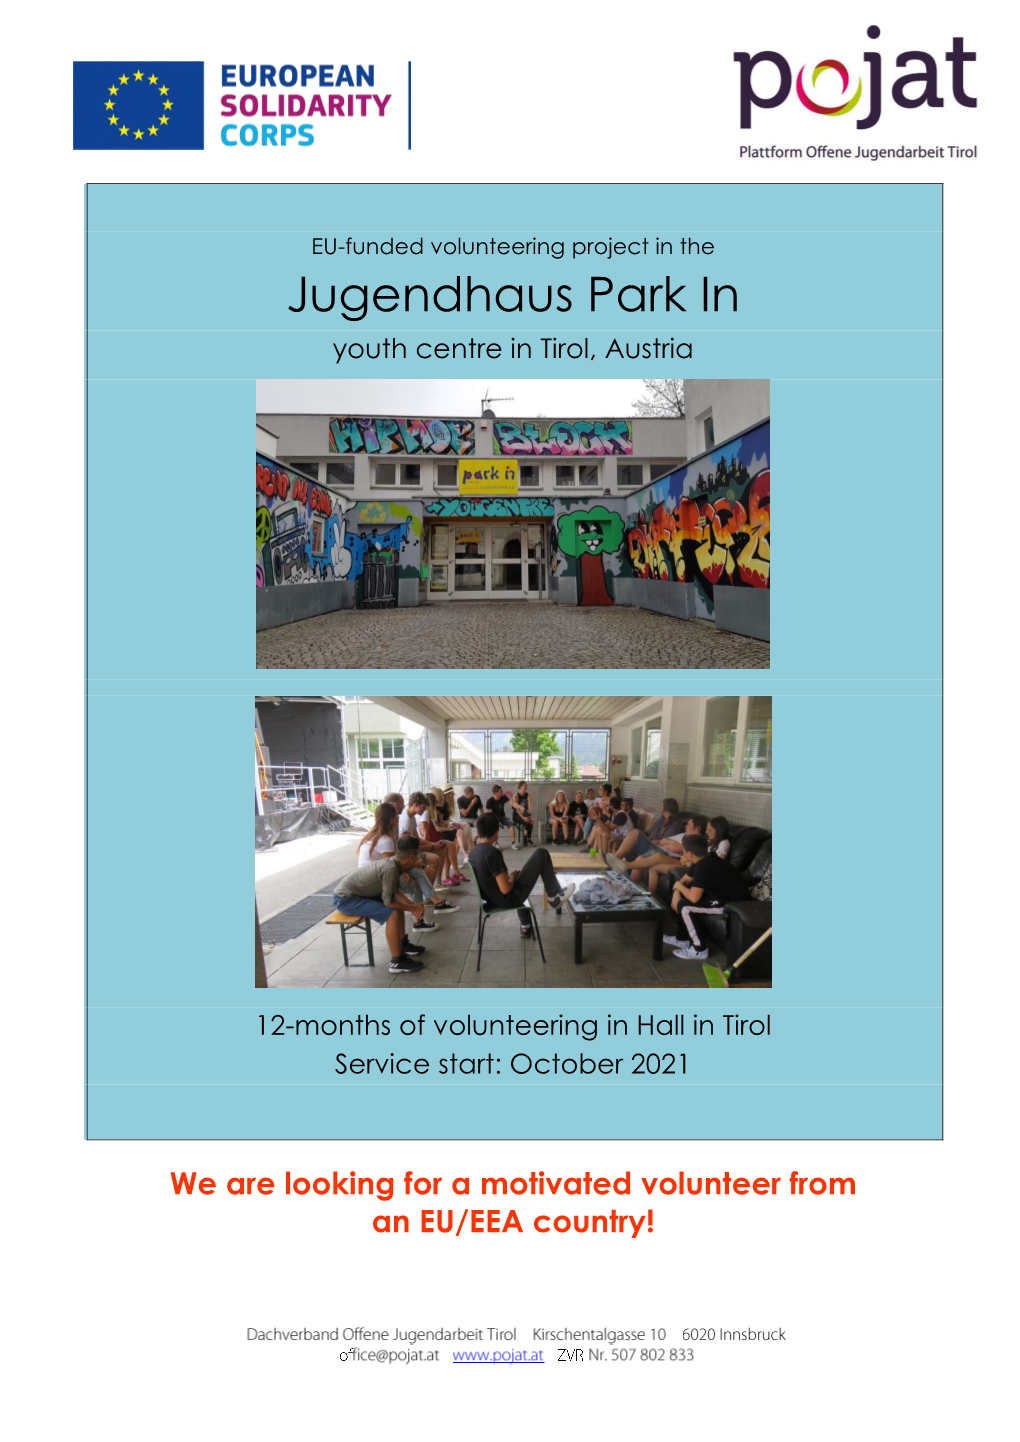 Jugendhaus Park in Youth Centre in Tirol, Austria